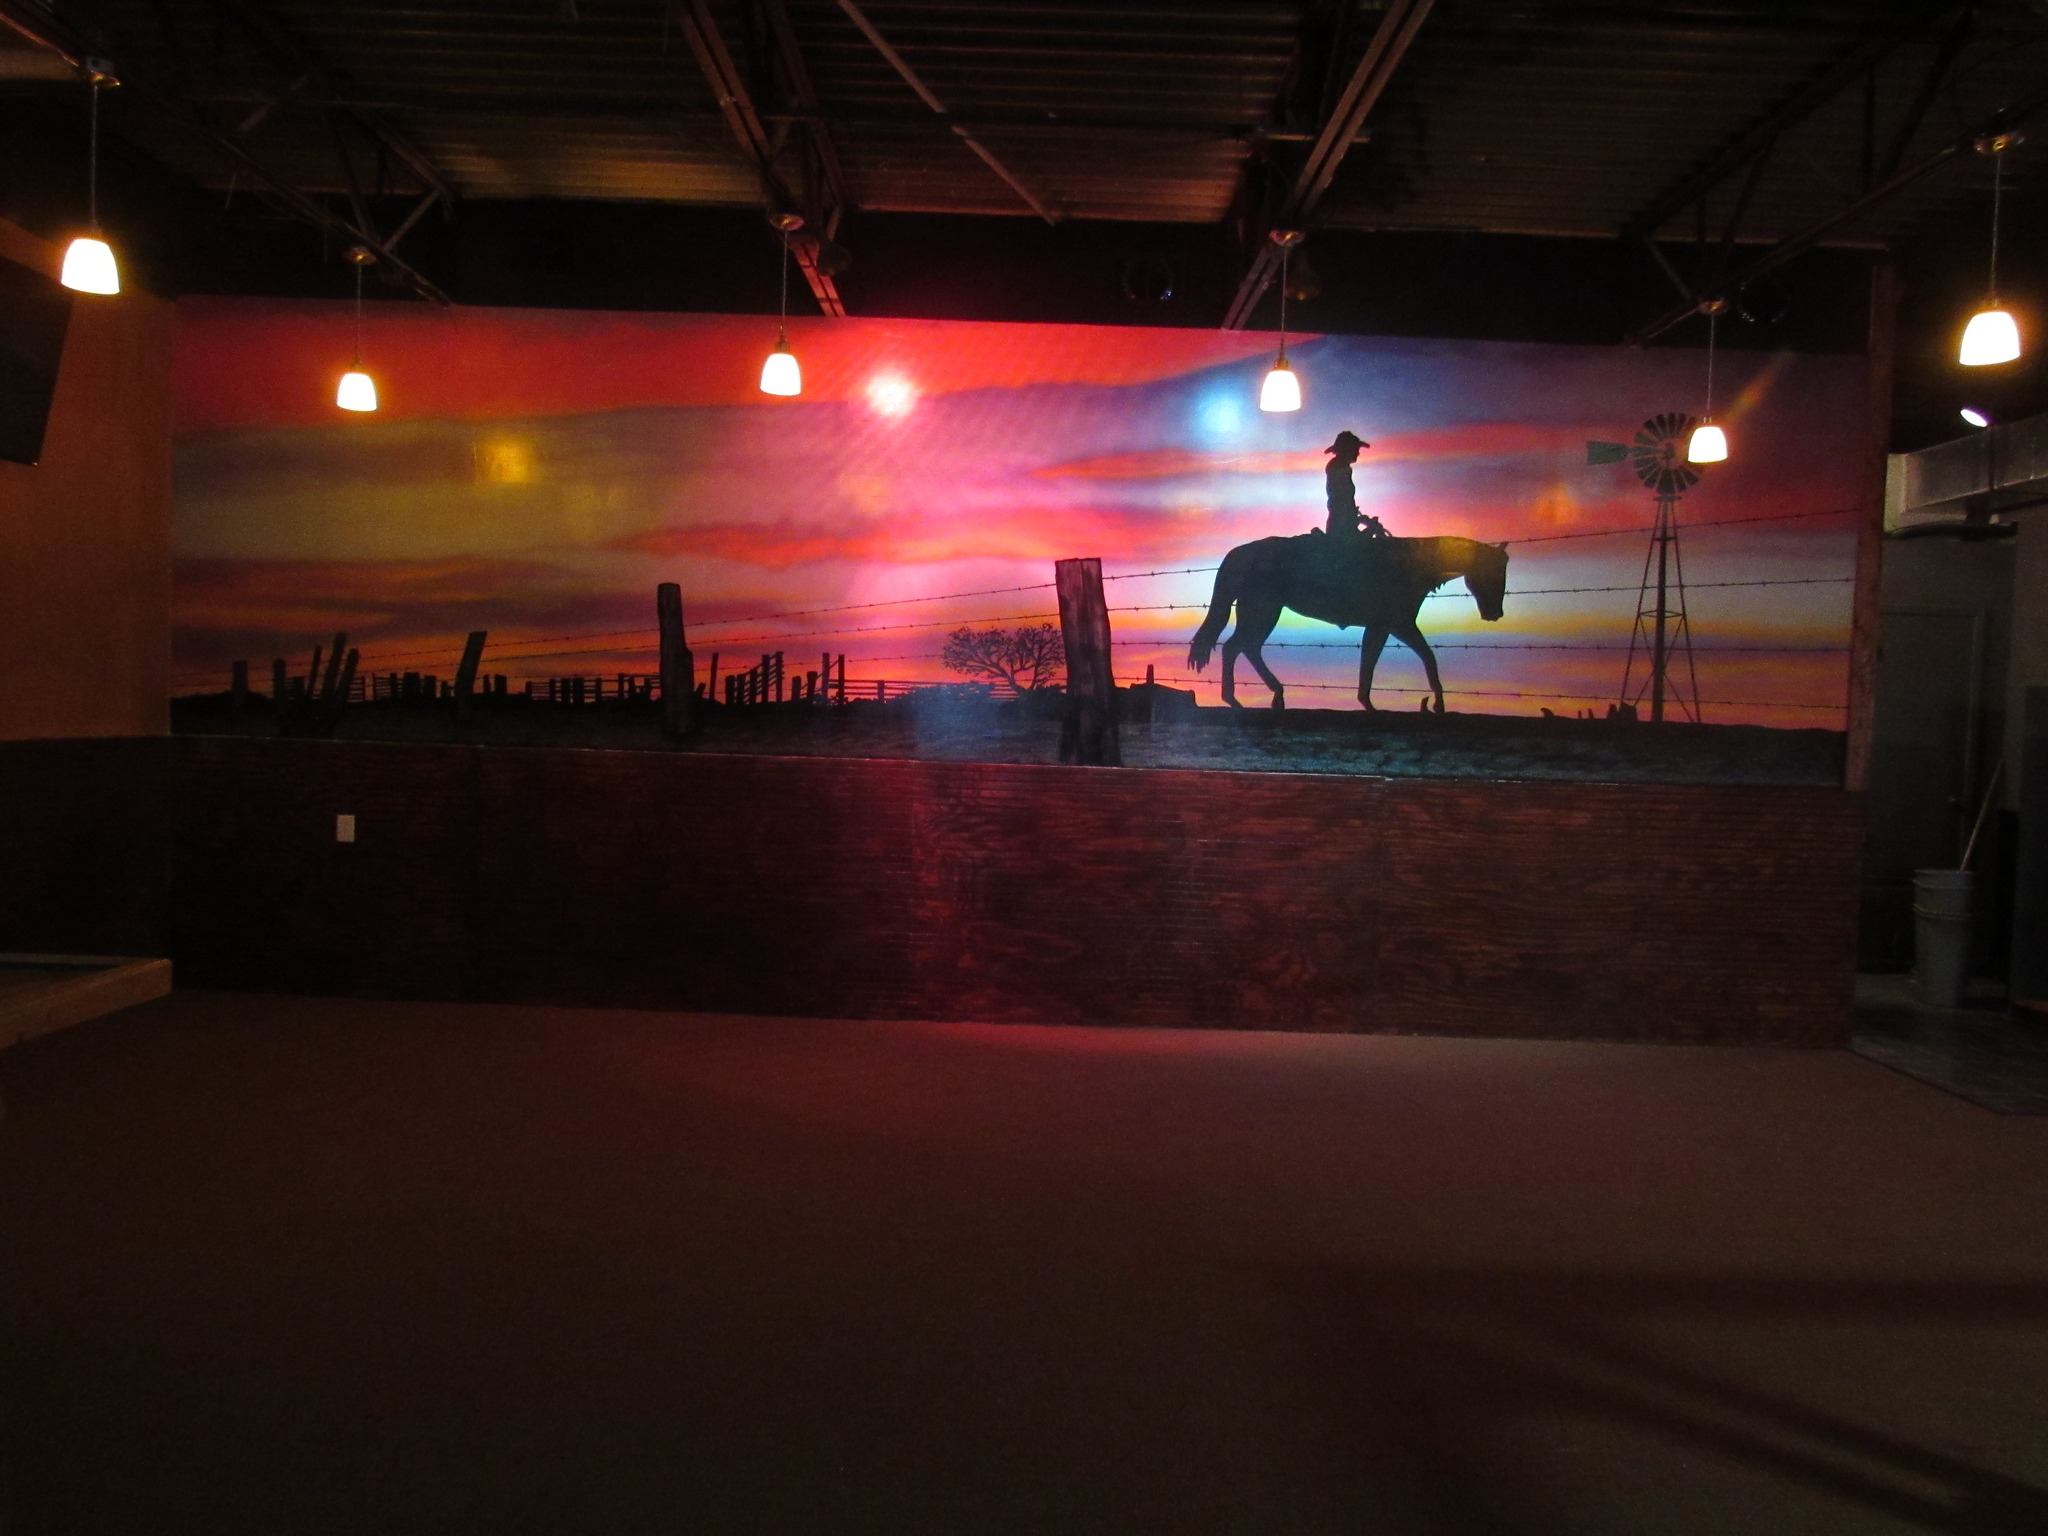 Mural painted for the Sunset Rodeo in Corpus Christi, Texas.